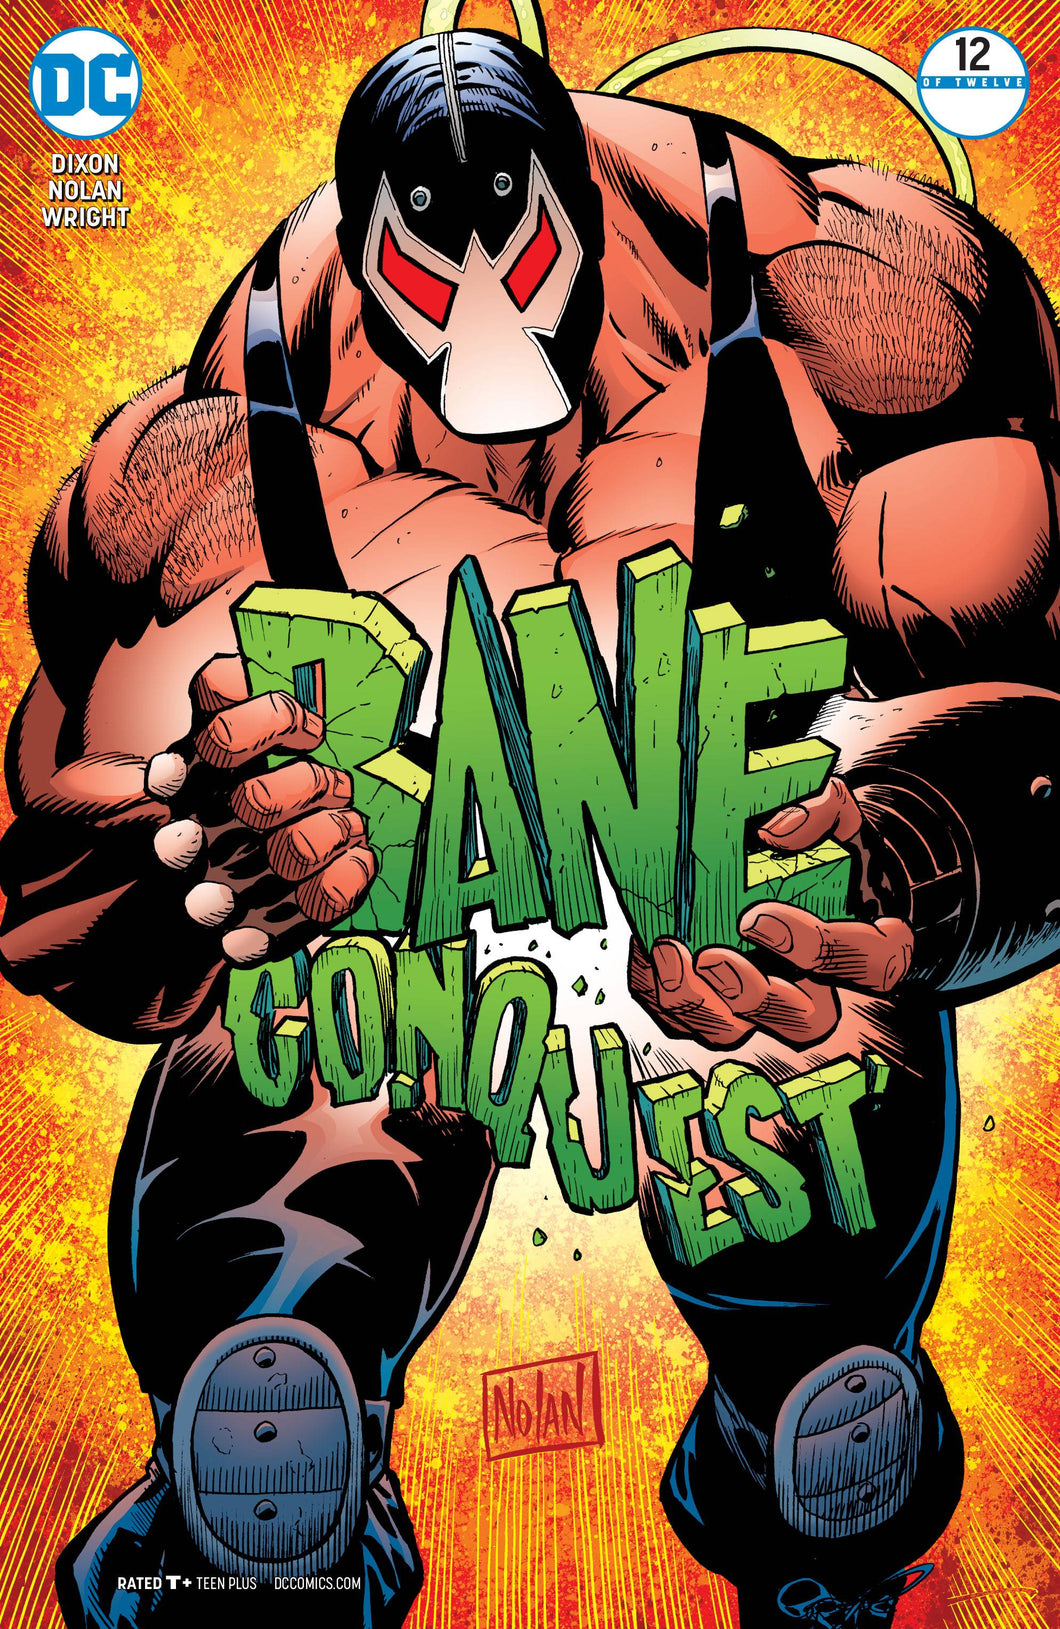 BANE CONQUEST #12 (OF 12) (06/27/2018)